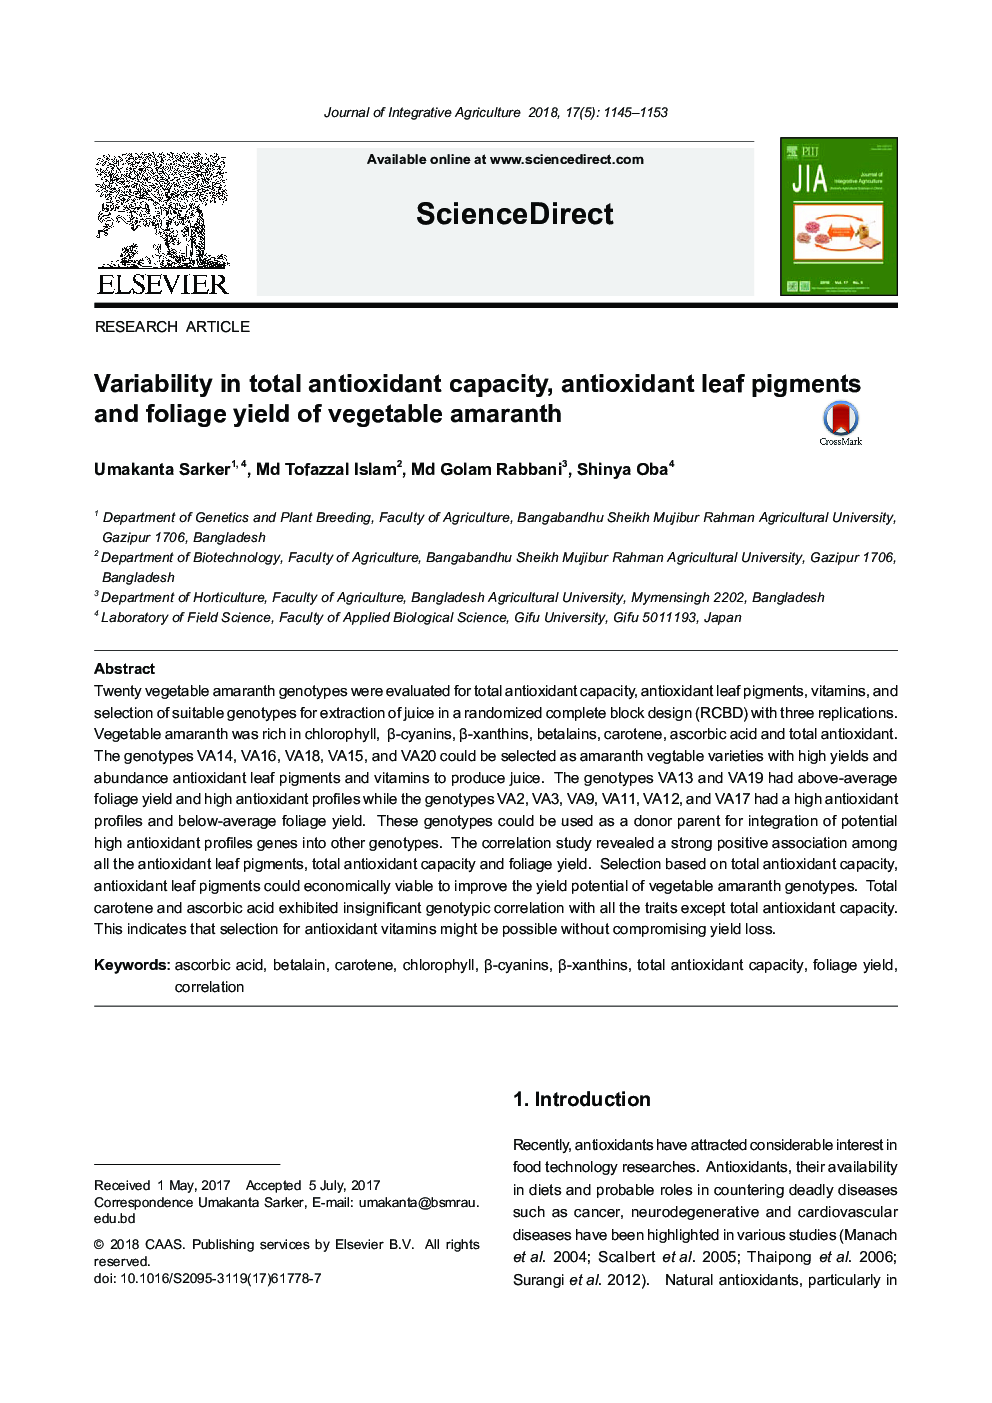 Variability in total antioxidant capacity, antioxidant leaf pigments and foliage yield of vegetable amaranth